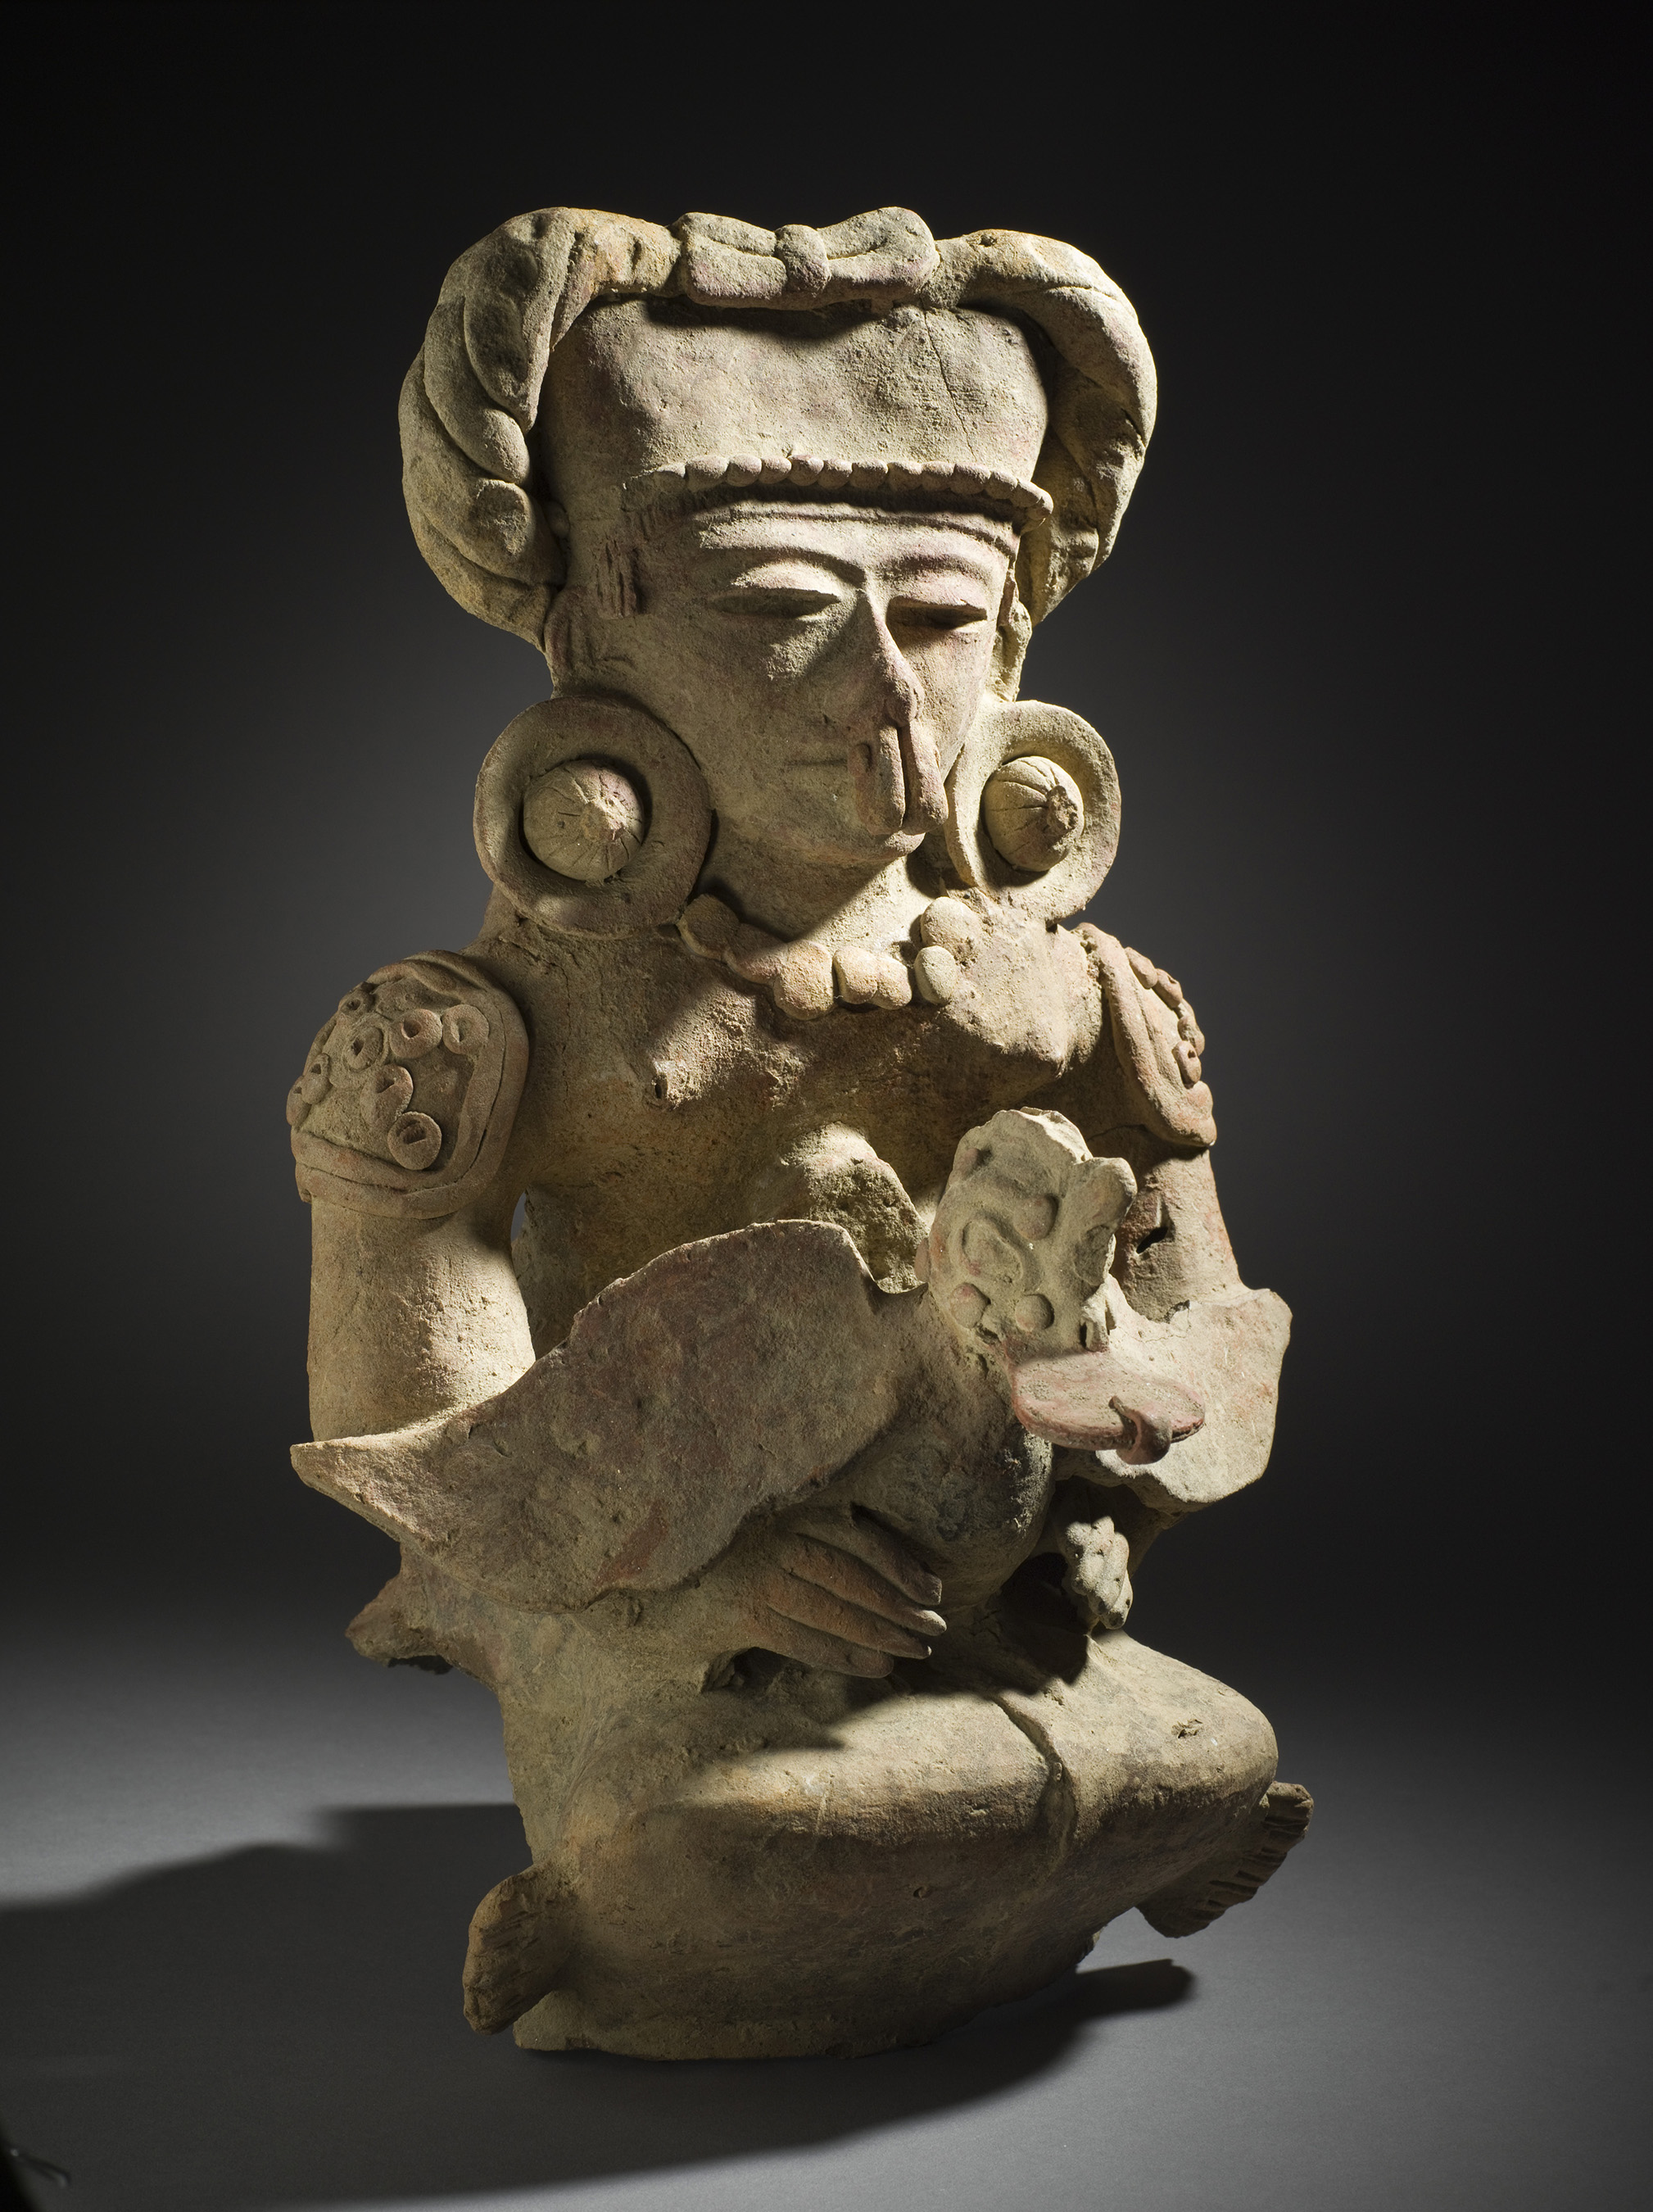 Unknown, Seated Figure Holding Duck, 400-600, Maya, Ceramic with specular hematite pigment, 13 3/4 x 8 3/4 x 9 in. (34.93 x 22.23 x 22.86 cm), Los Angeles County Museum of Art, Gift of the Art Museum Council in honor of the museum's twenty-fifth anniversary (M.90.168.45) Photo © Museum Associates/LACMA